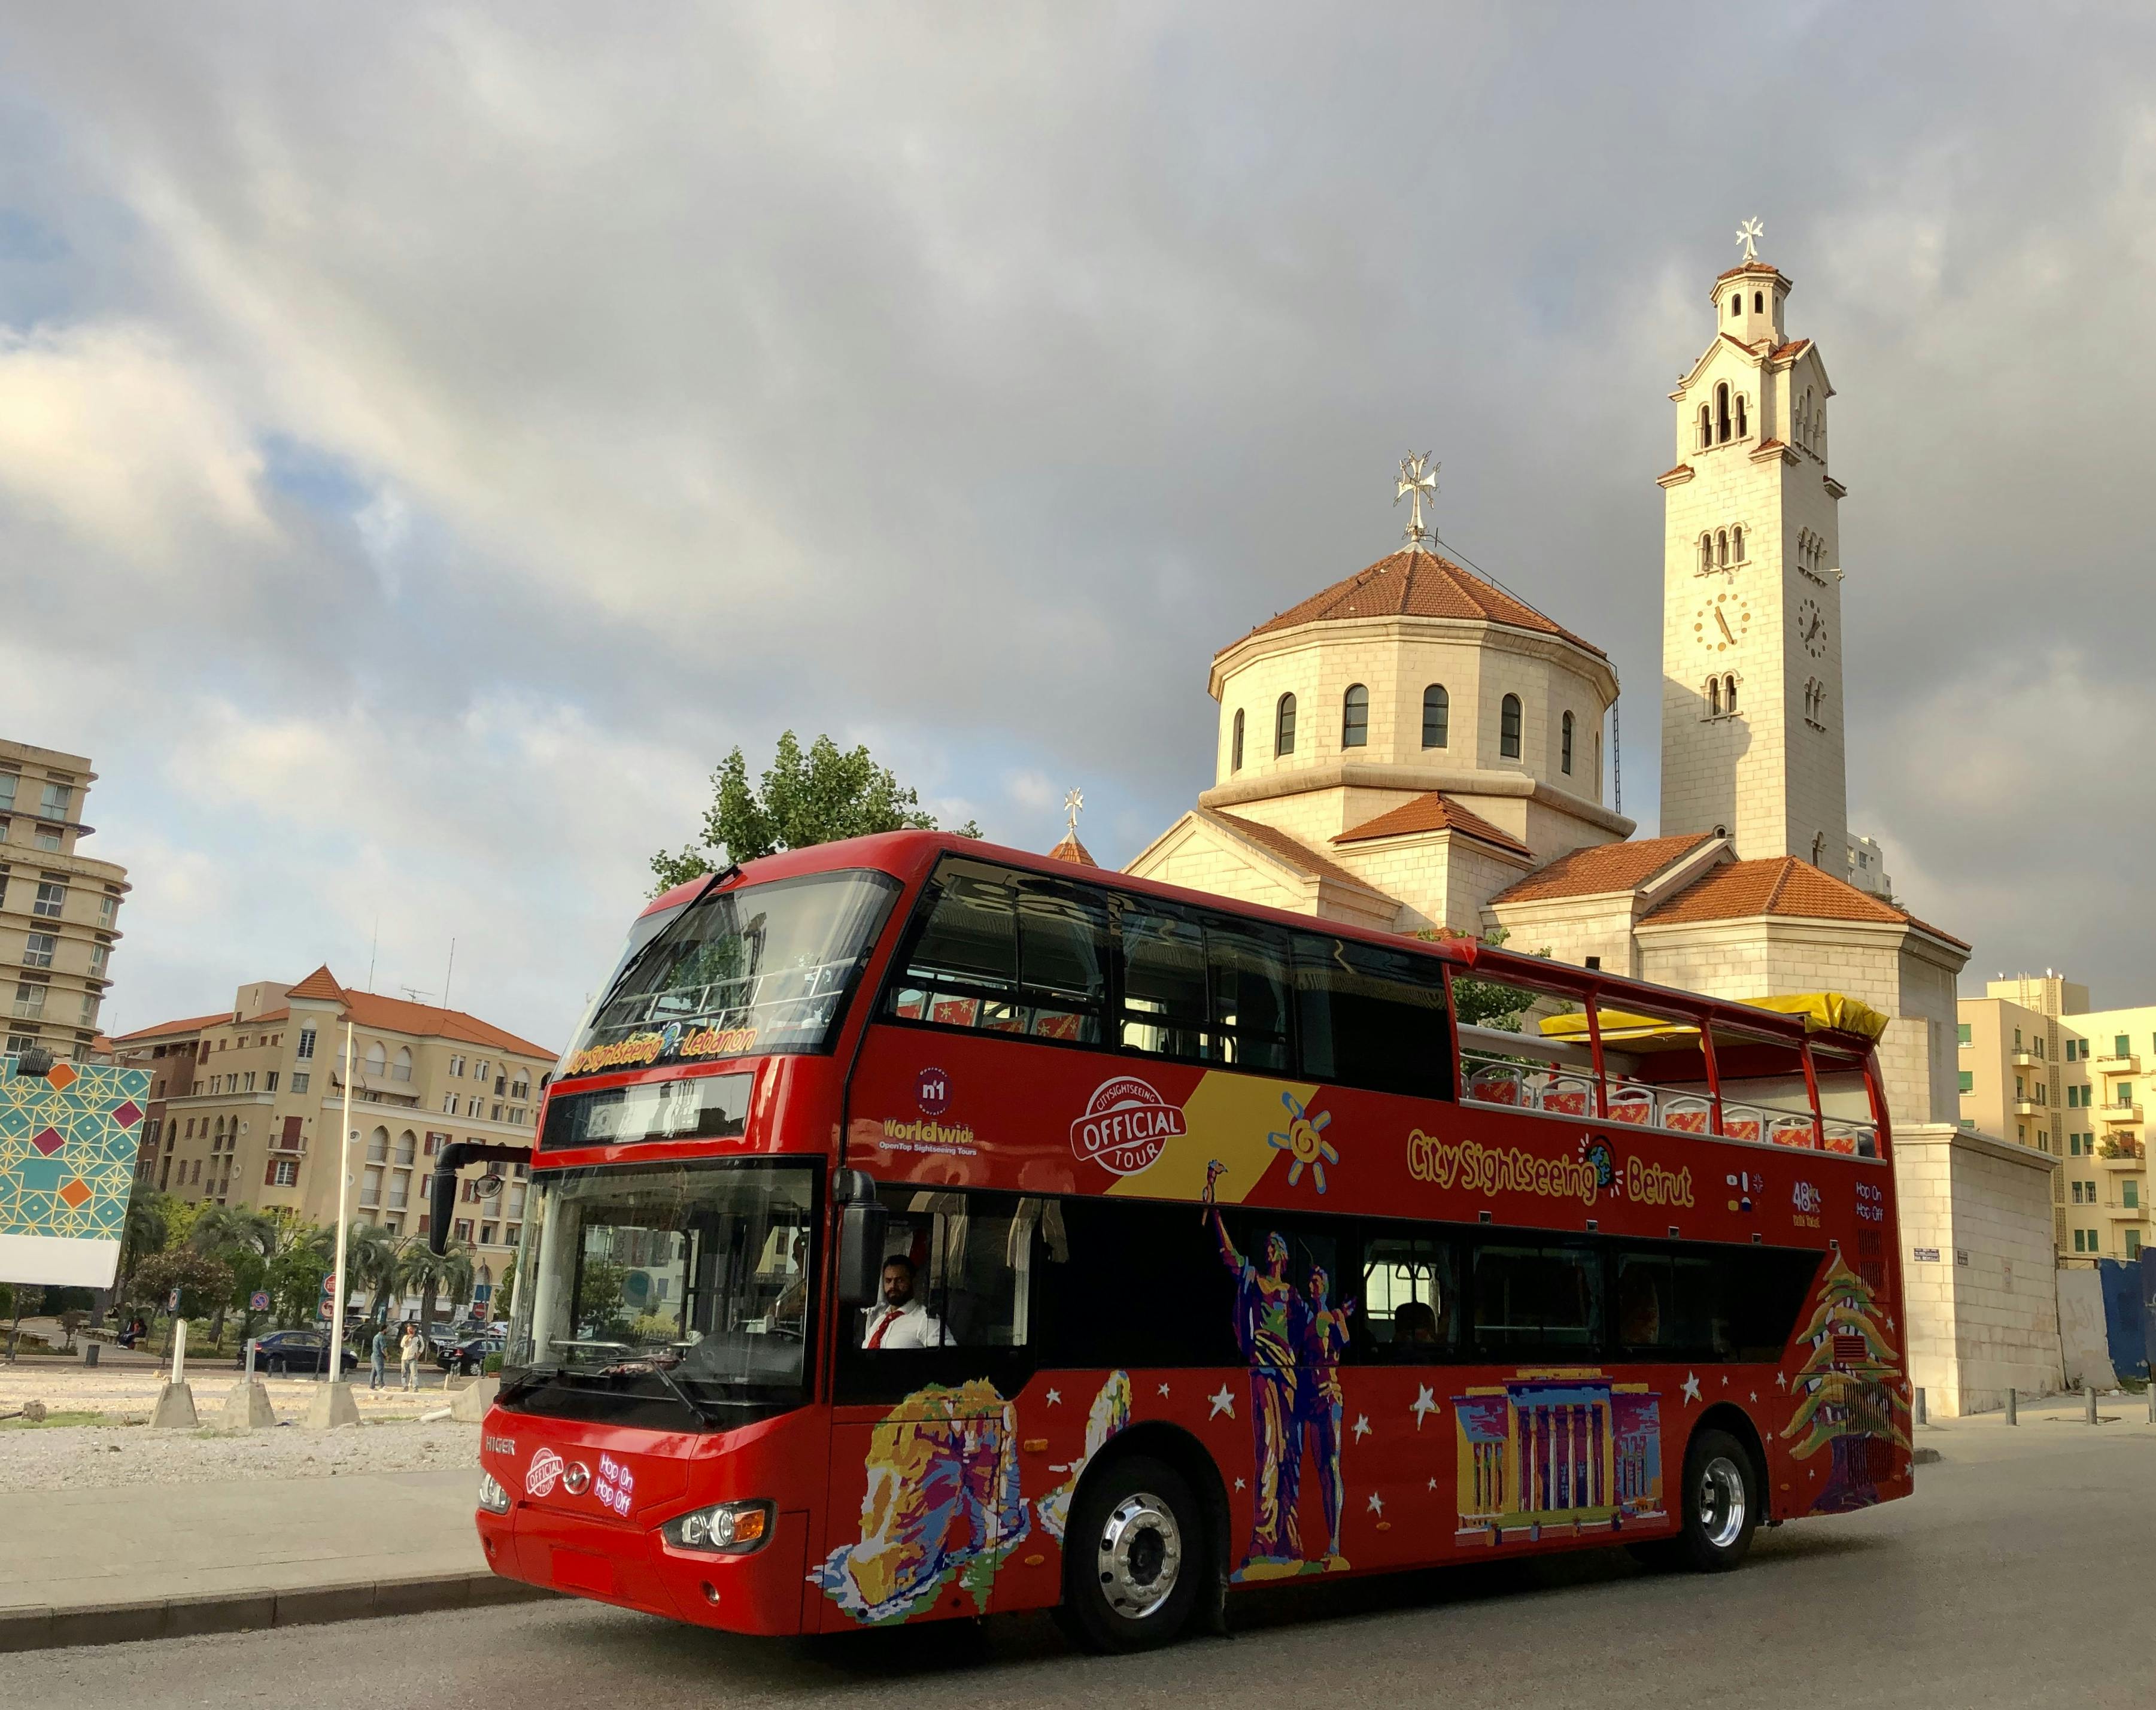 City Sightseeing hop-on hop-off bus tour of Beirut